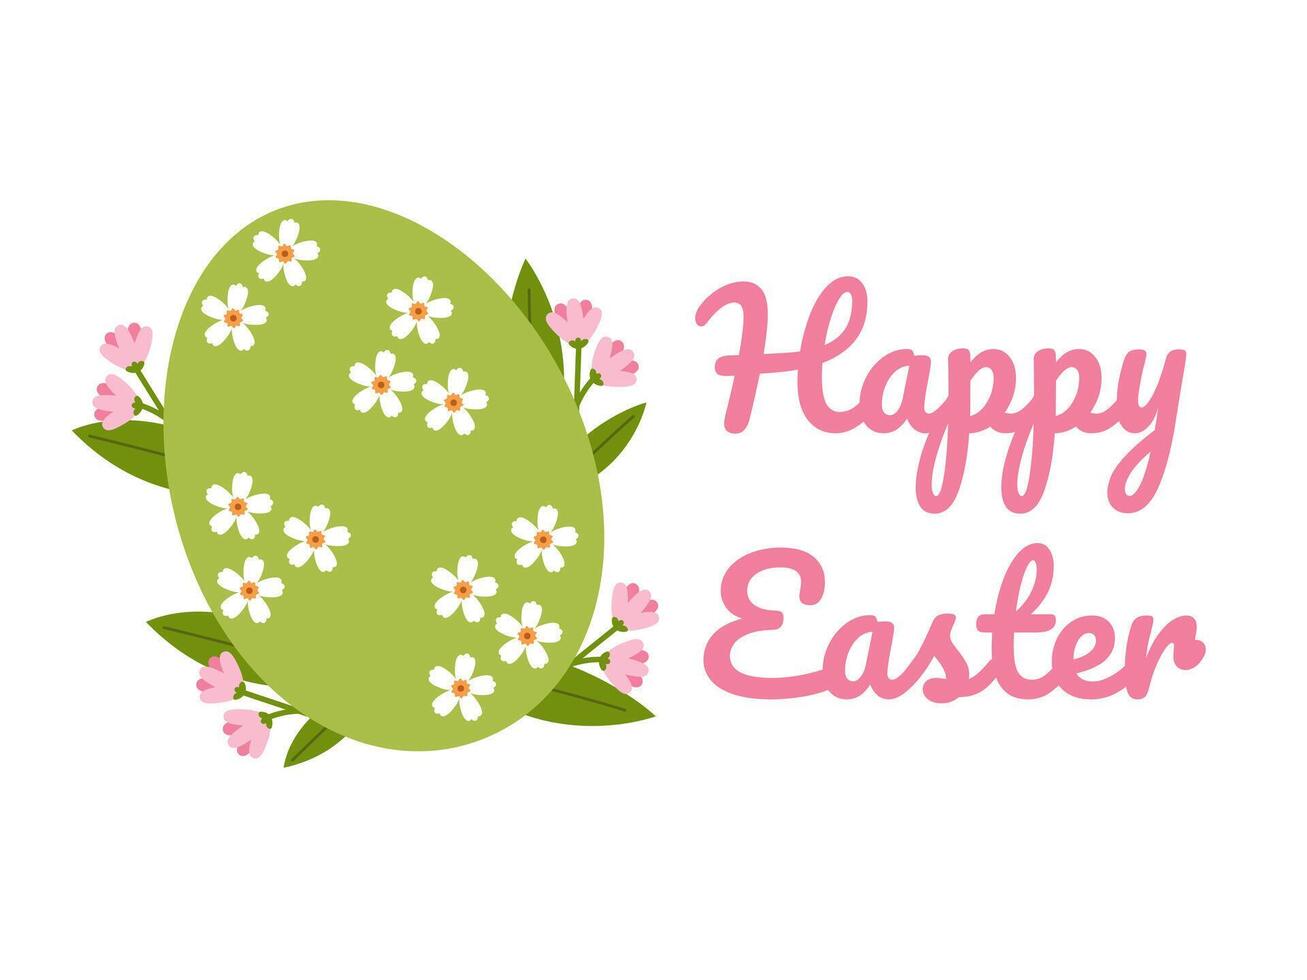 Easter background with Happy easter text and with floral elements. Vector illustration for greeting card, design, congratulation